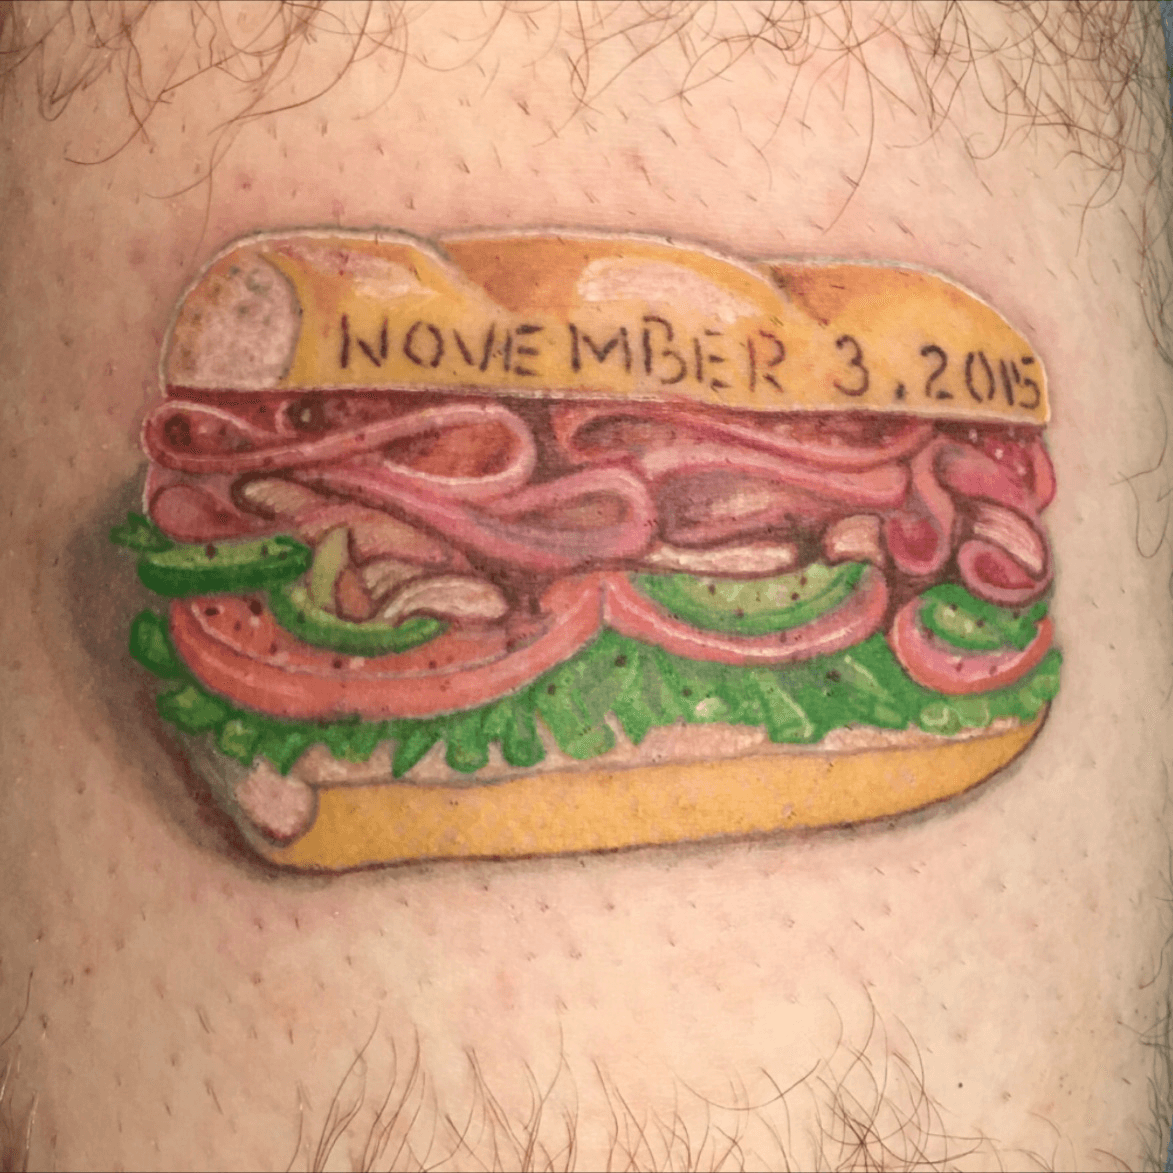 TODAY Get free sandwiches for life at Subway by getting tattoo  KSNV